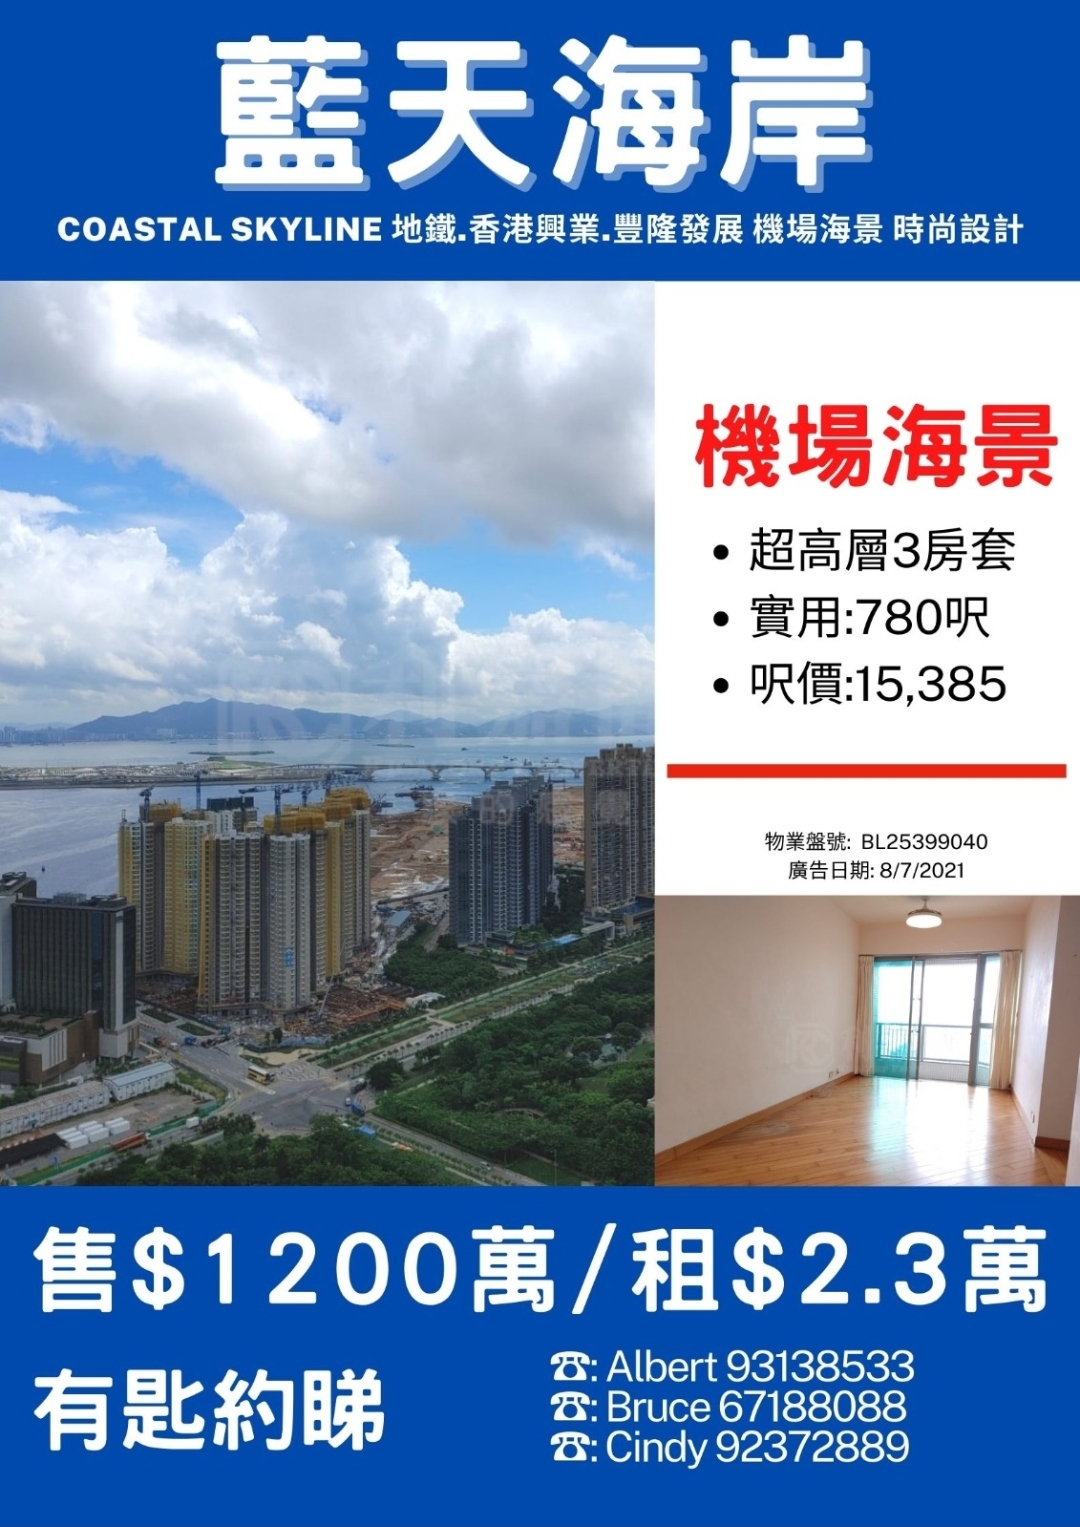 The blue sky is full of panoramic views of the airport and the bay, and the high-rise three-bedroom suites are available for immediate appointment at 67188088. Chen Sheng